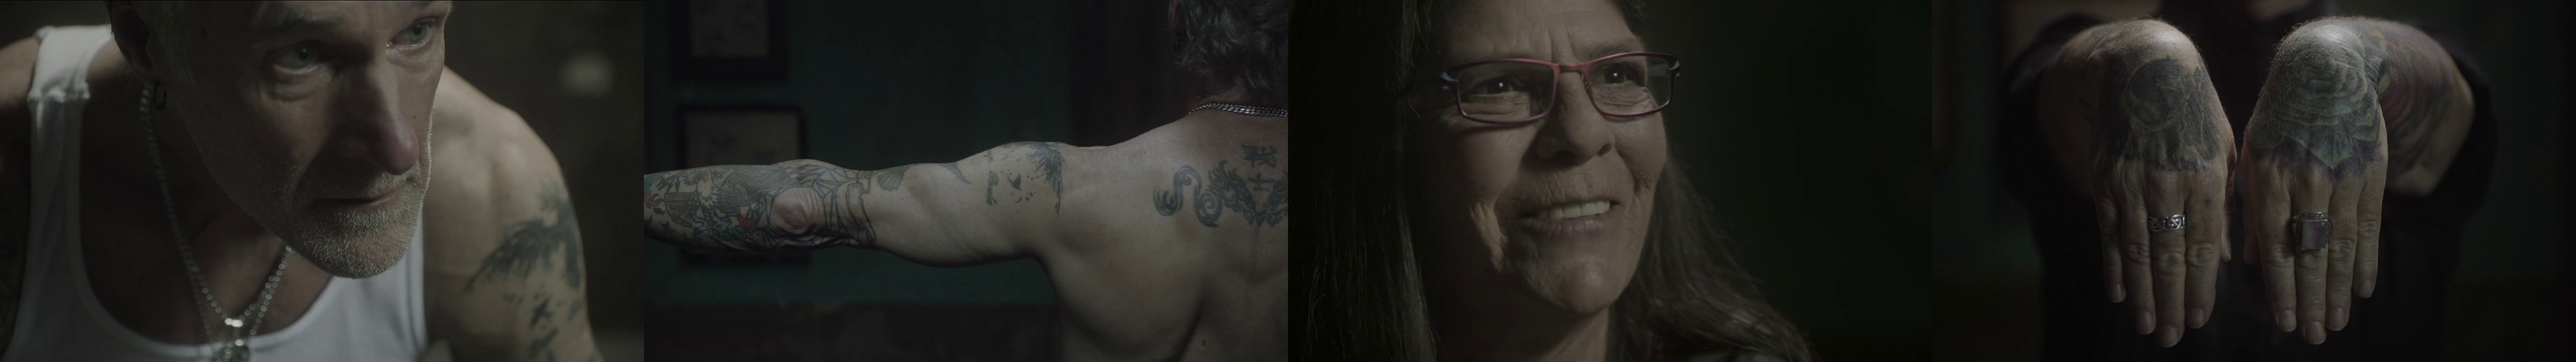 Film Review | You Won’t Regret That Tattoo (2013)